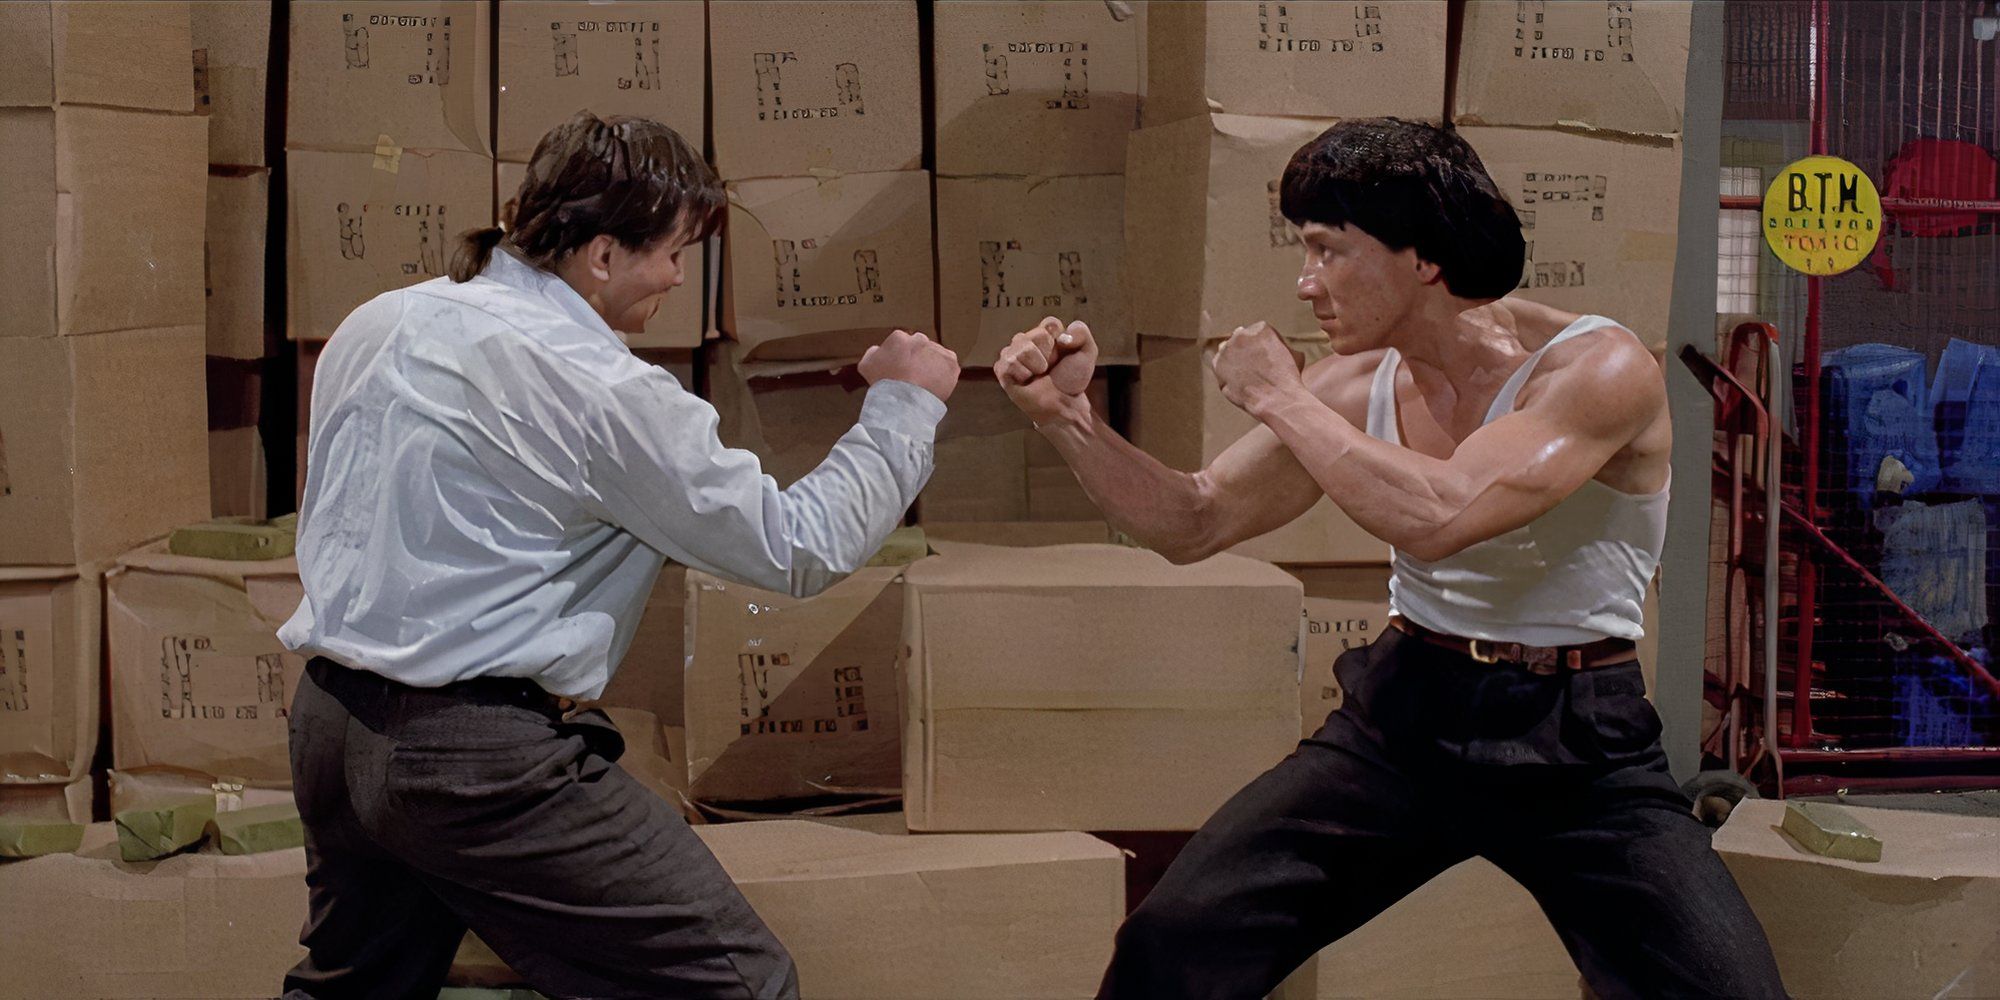 Jackie Chan squares up with Benny Urquidez in Dragons Forever